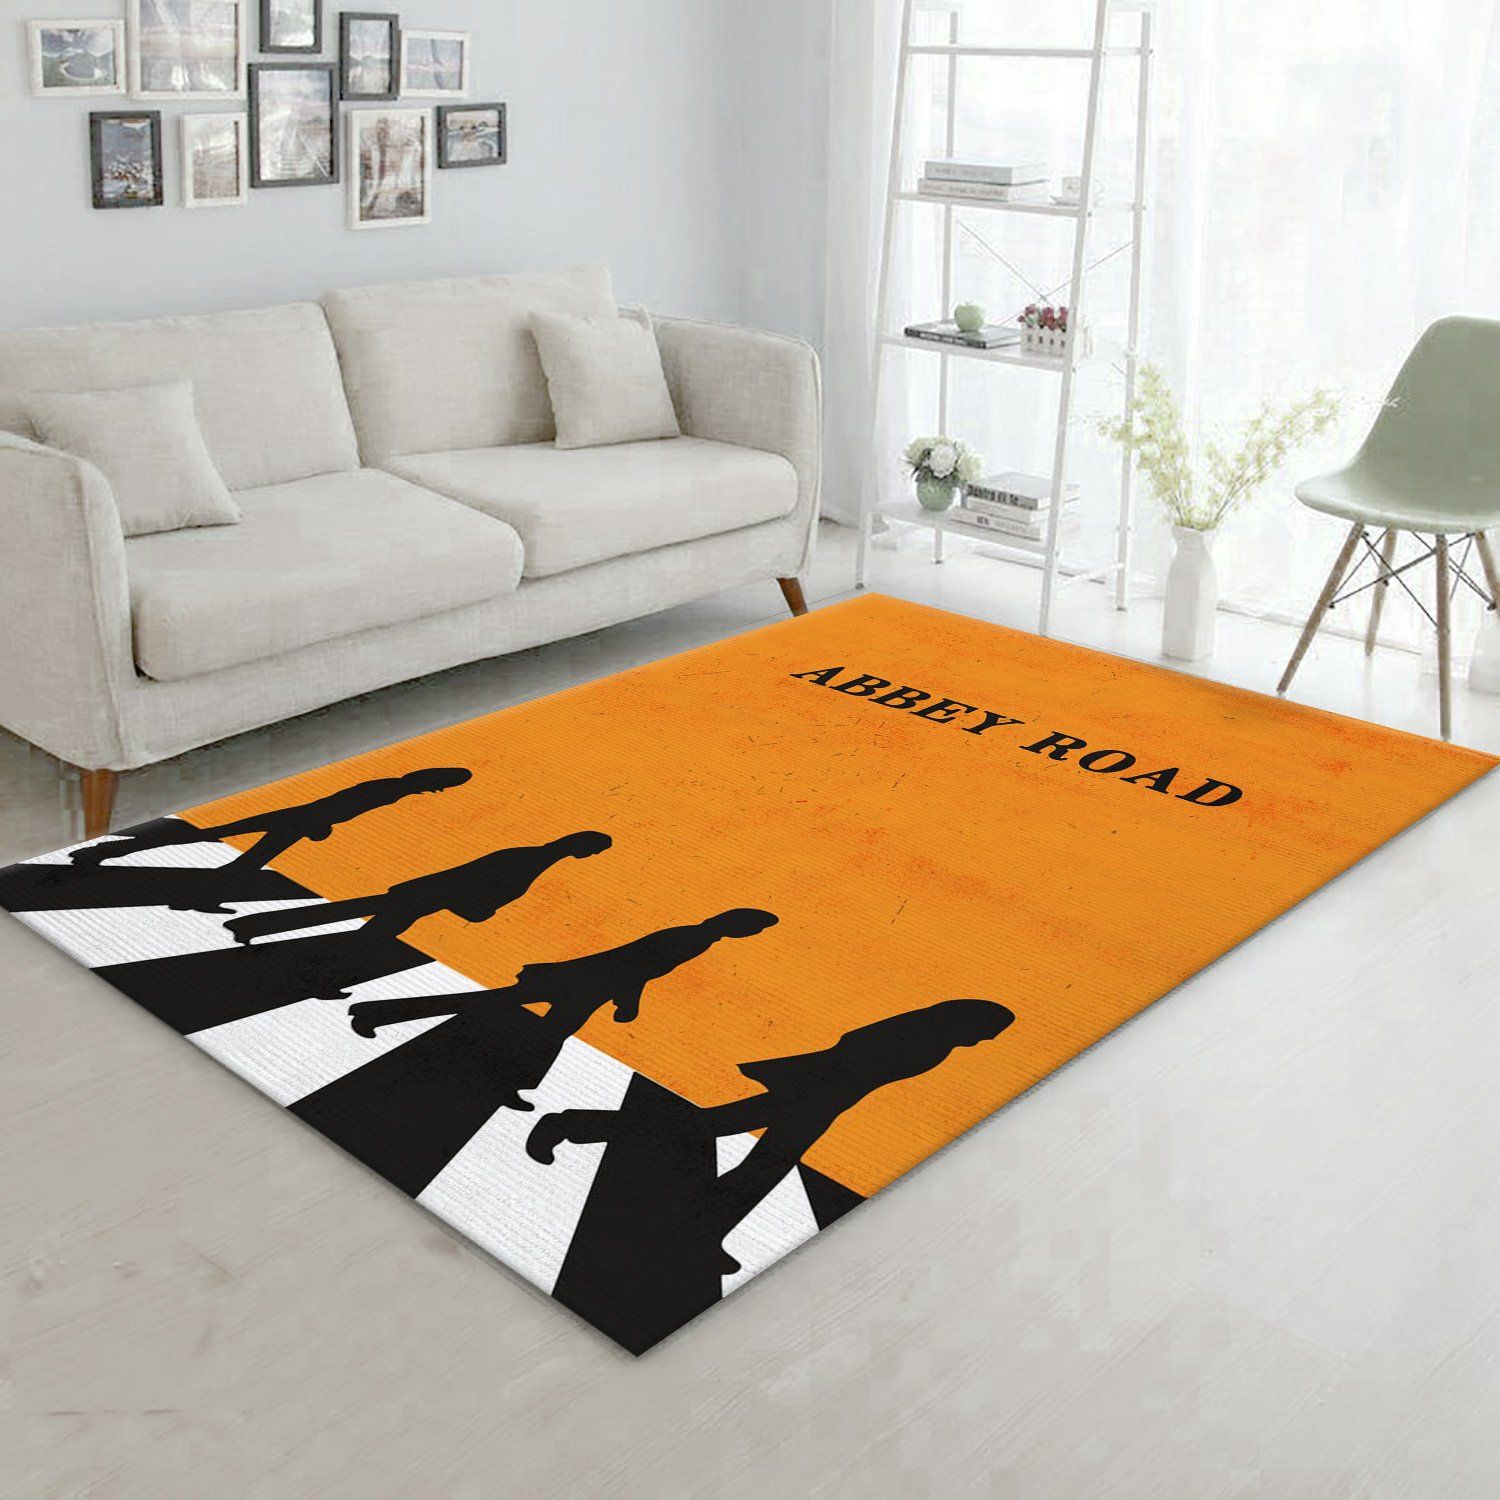 Abbey Road Team Rug Custom Size And Printing